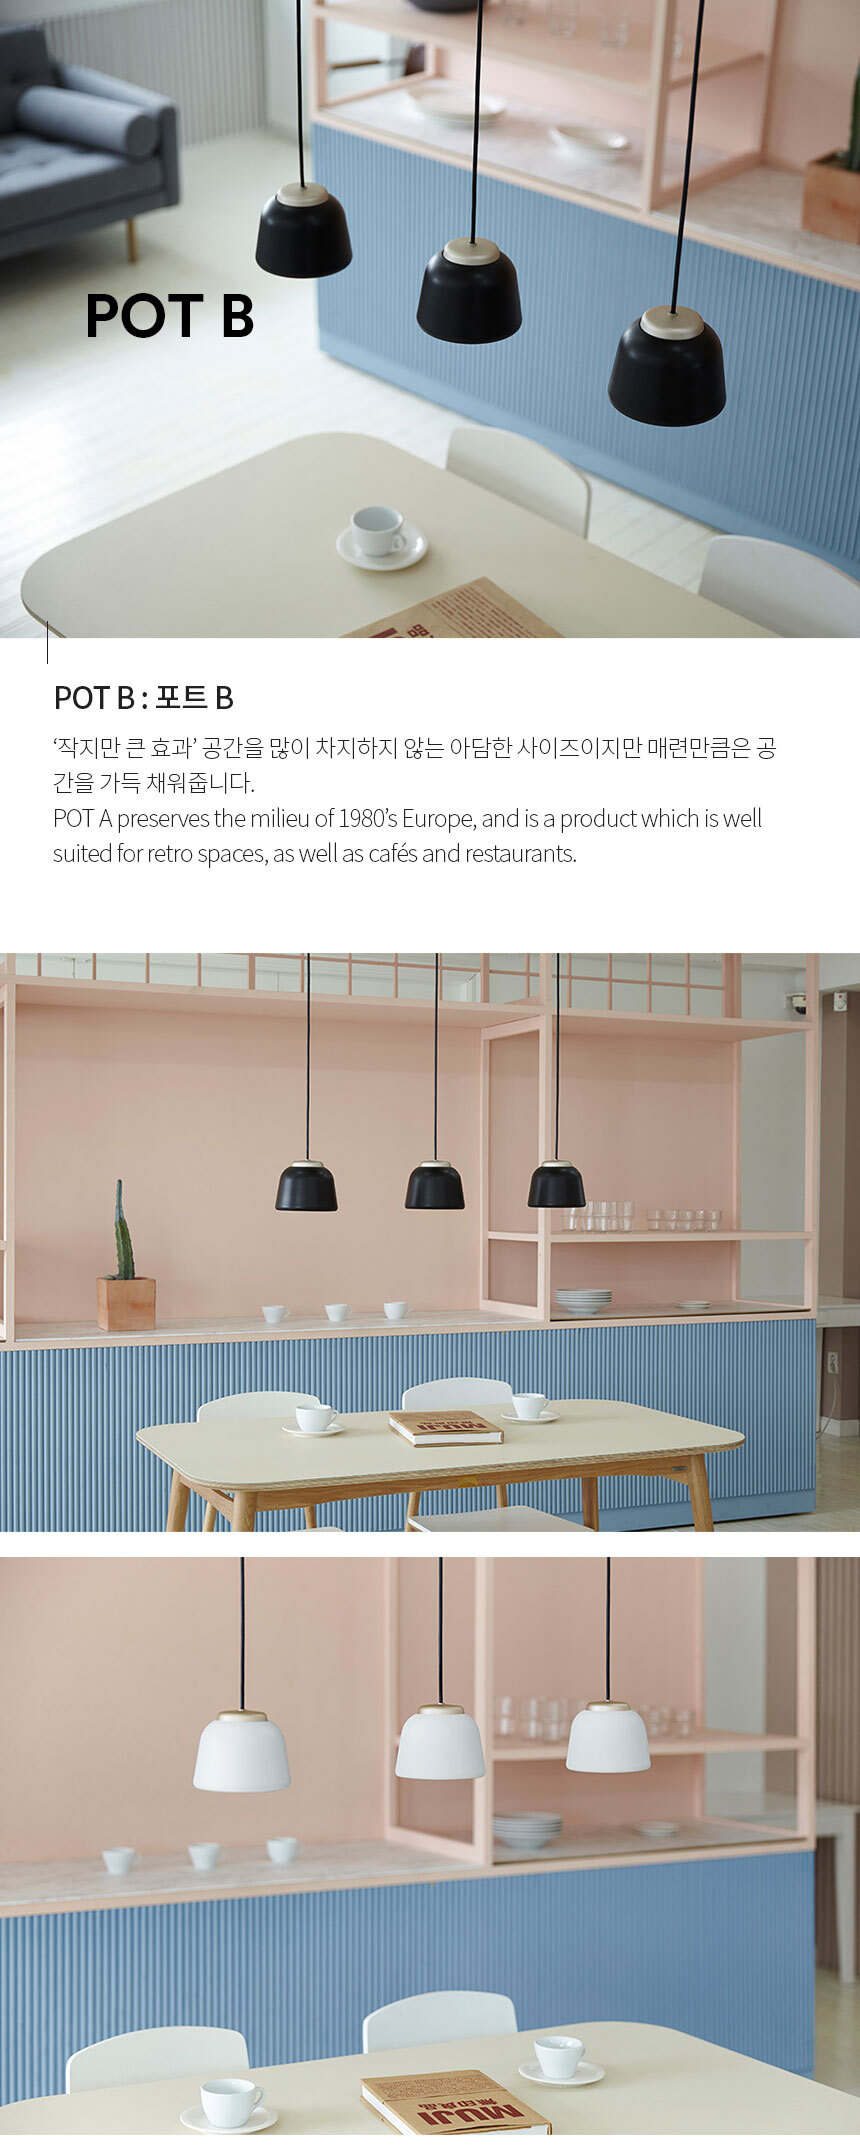 POT B : 포트 B 작지만 큰 효과’ 공간을 많이 차지하지 않는 아담한 사이즈이지만 매련만큼은 공
간을 가득 채워줍니다.
POT A preserves the milieu of 1980’s Europe, and is a product which is well 
suited for retro spaces, as well as cafés and restaurants.